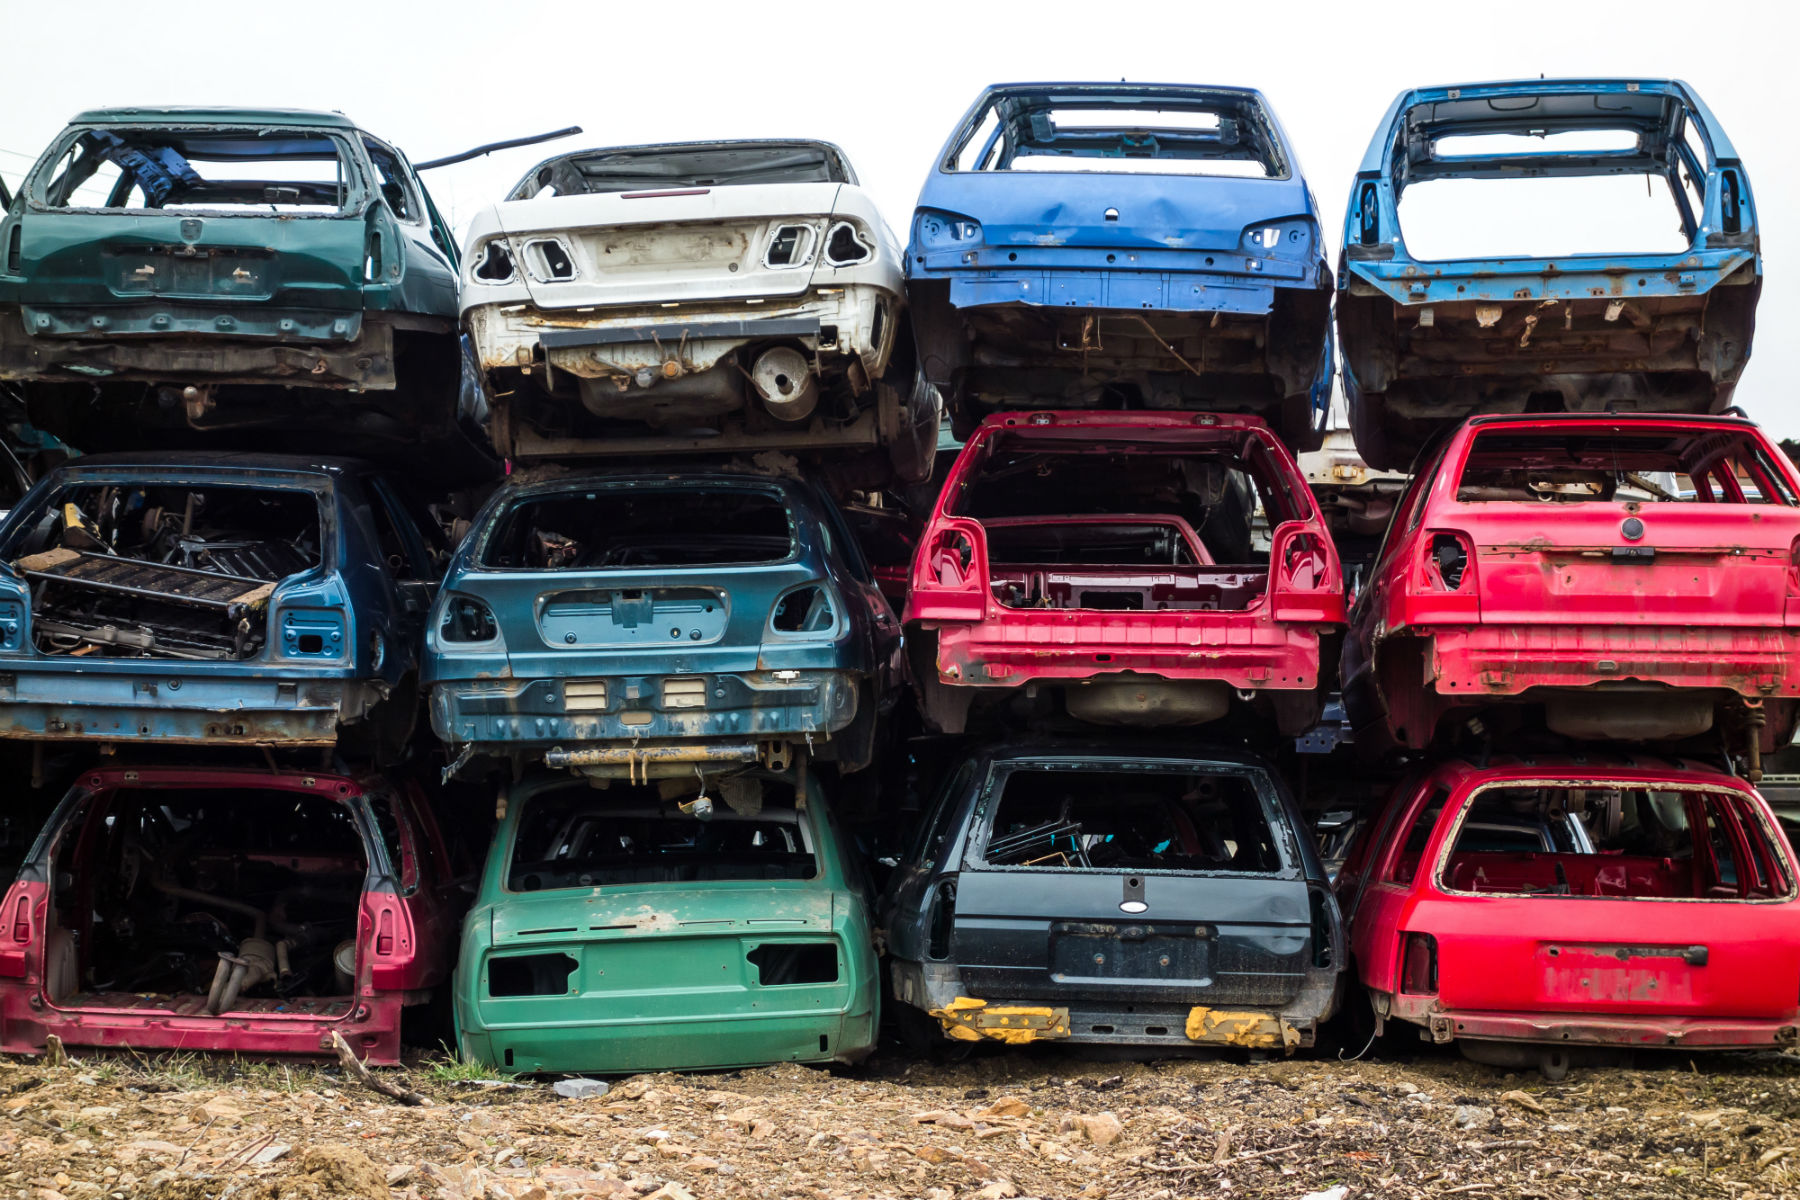 Vauxhall scrappage scheme has already scrapped 20,000 cars